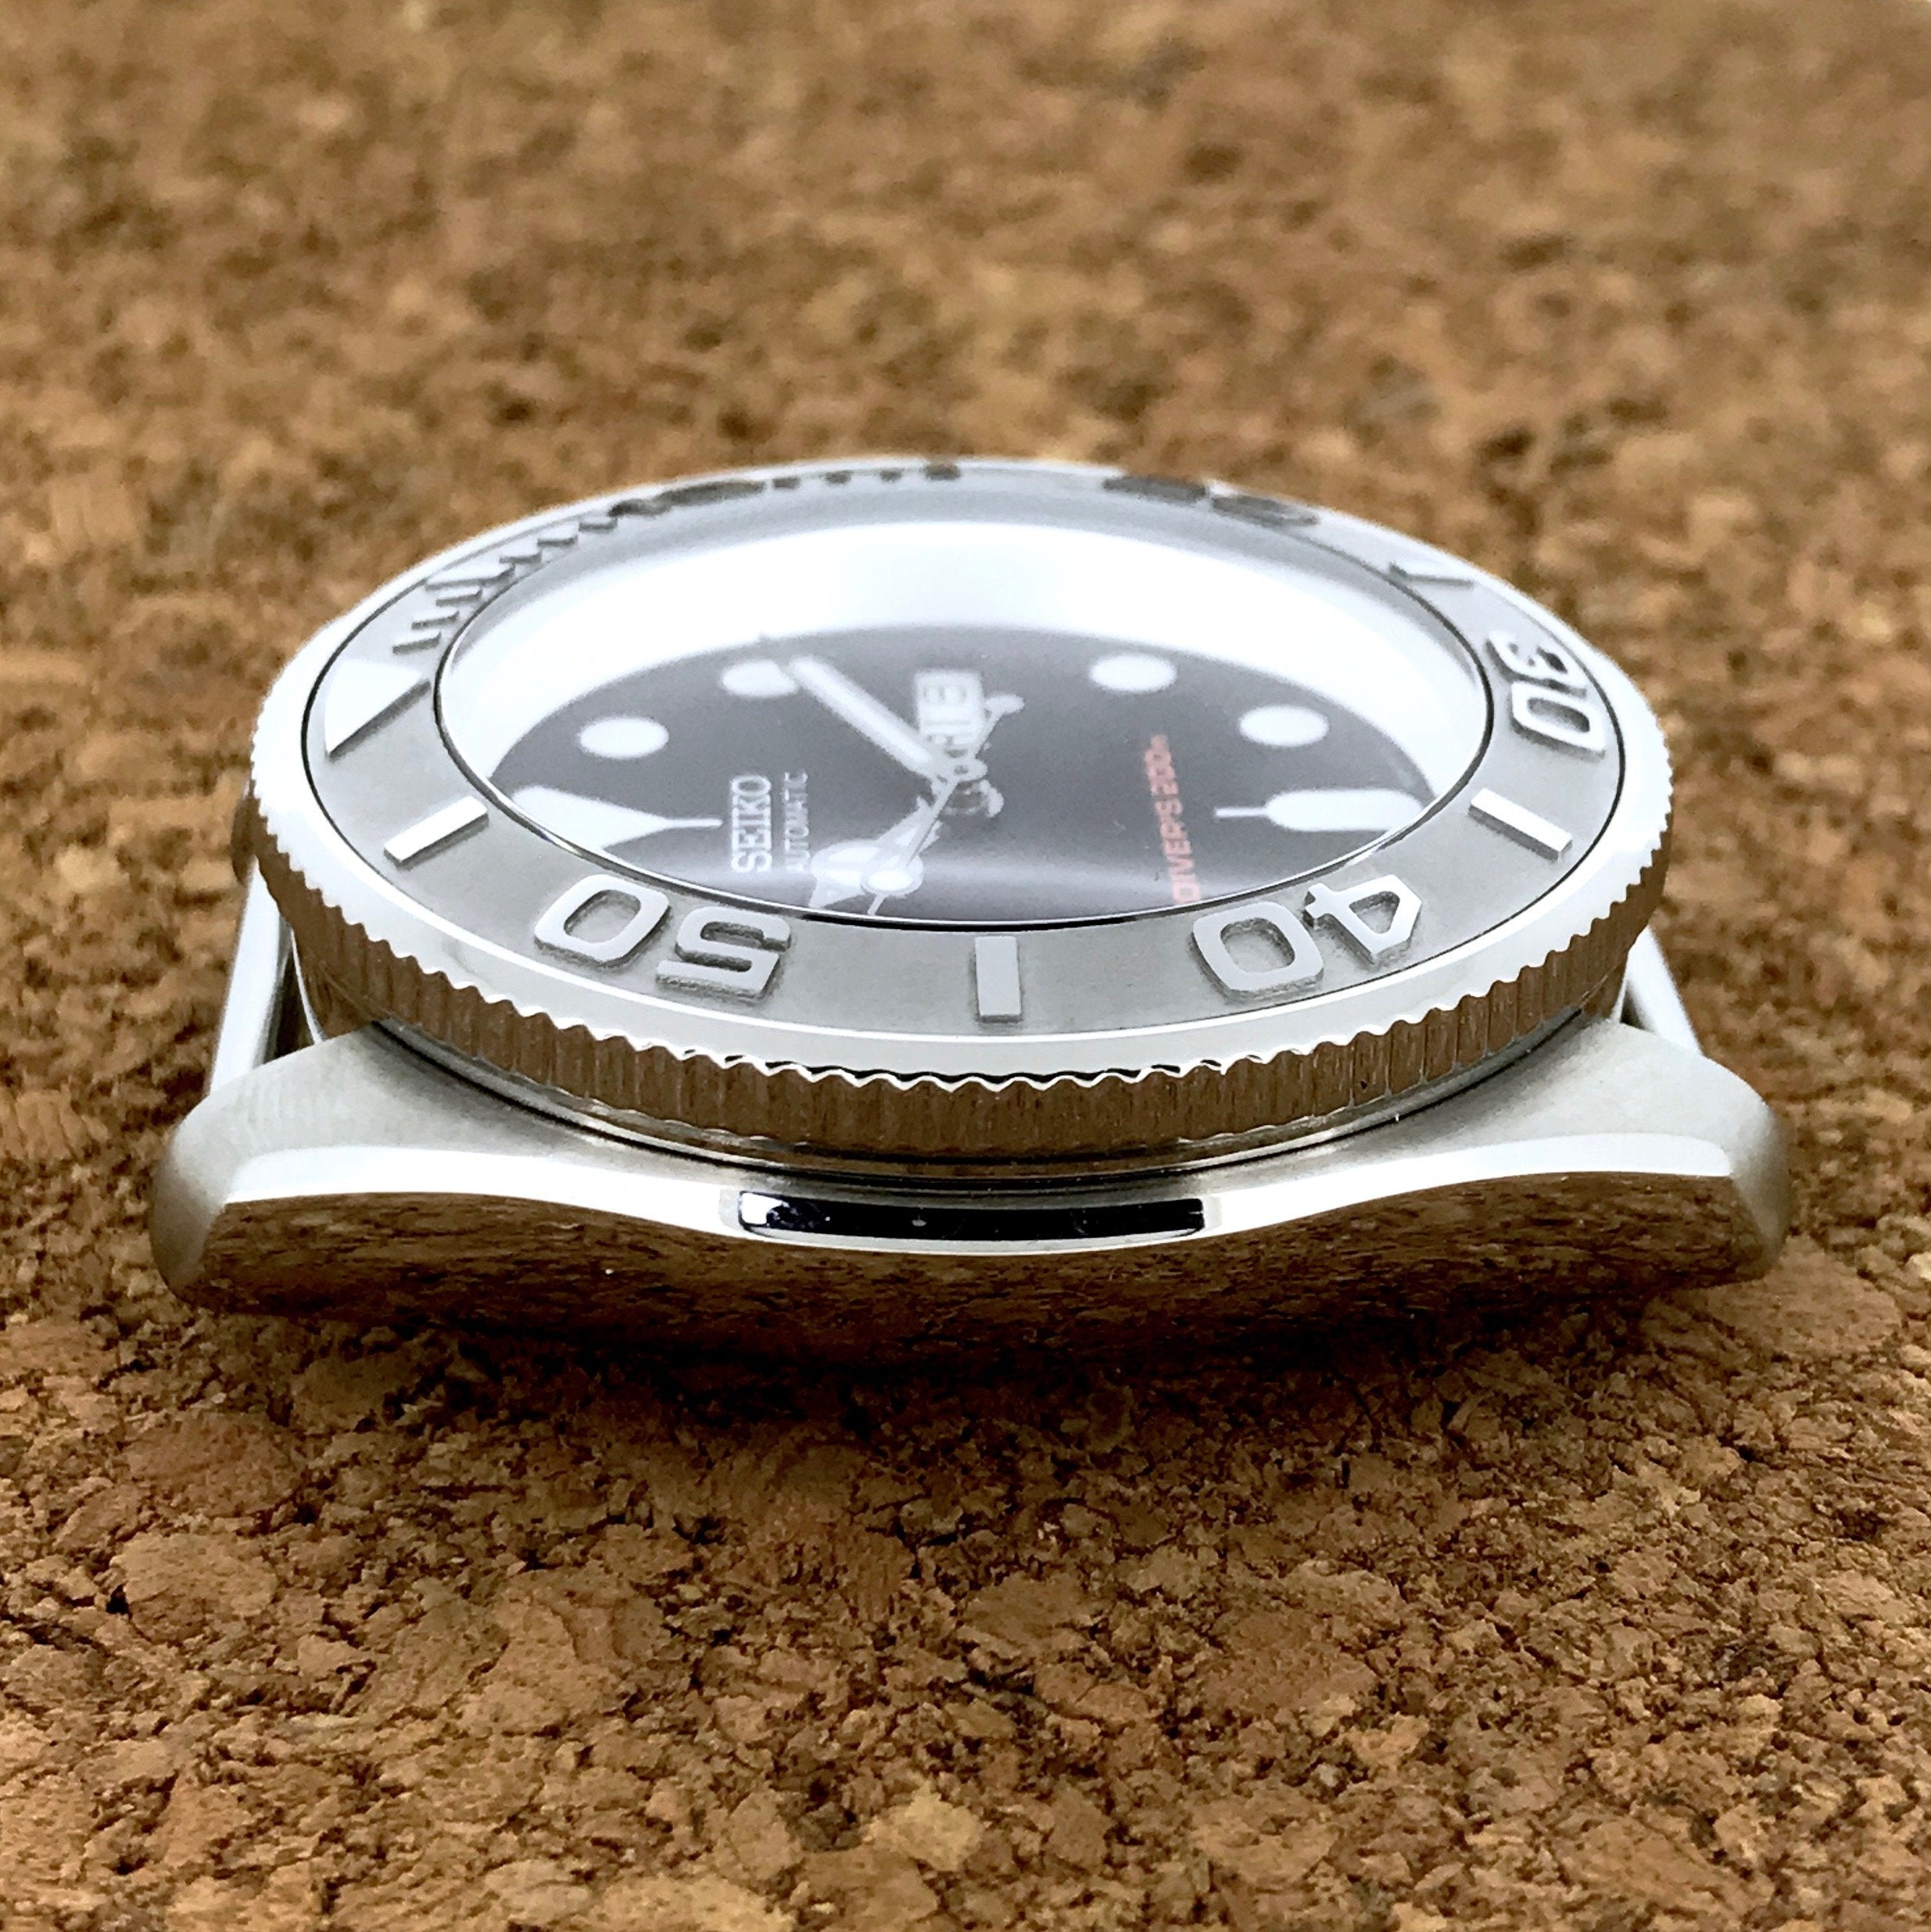 Sapphire Double Dome - No Bevel Edge - SKX007/SRPD - DLW WATCHES